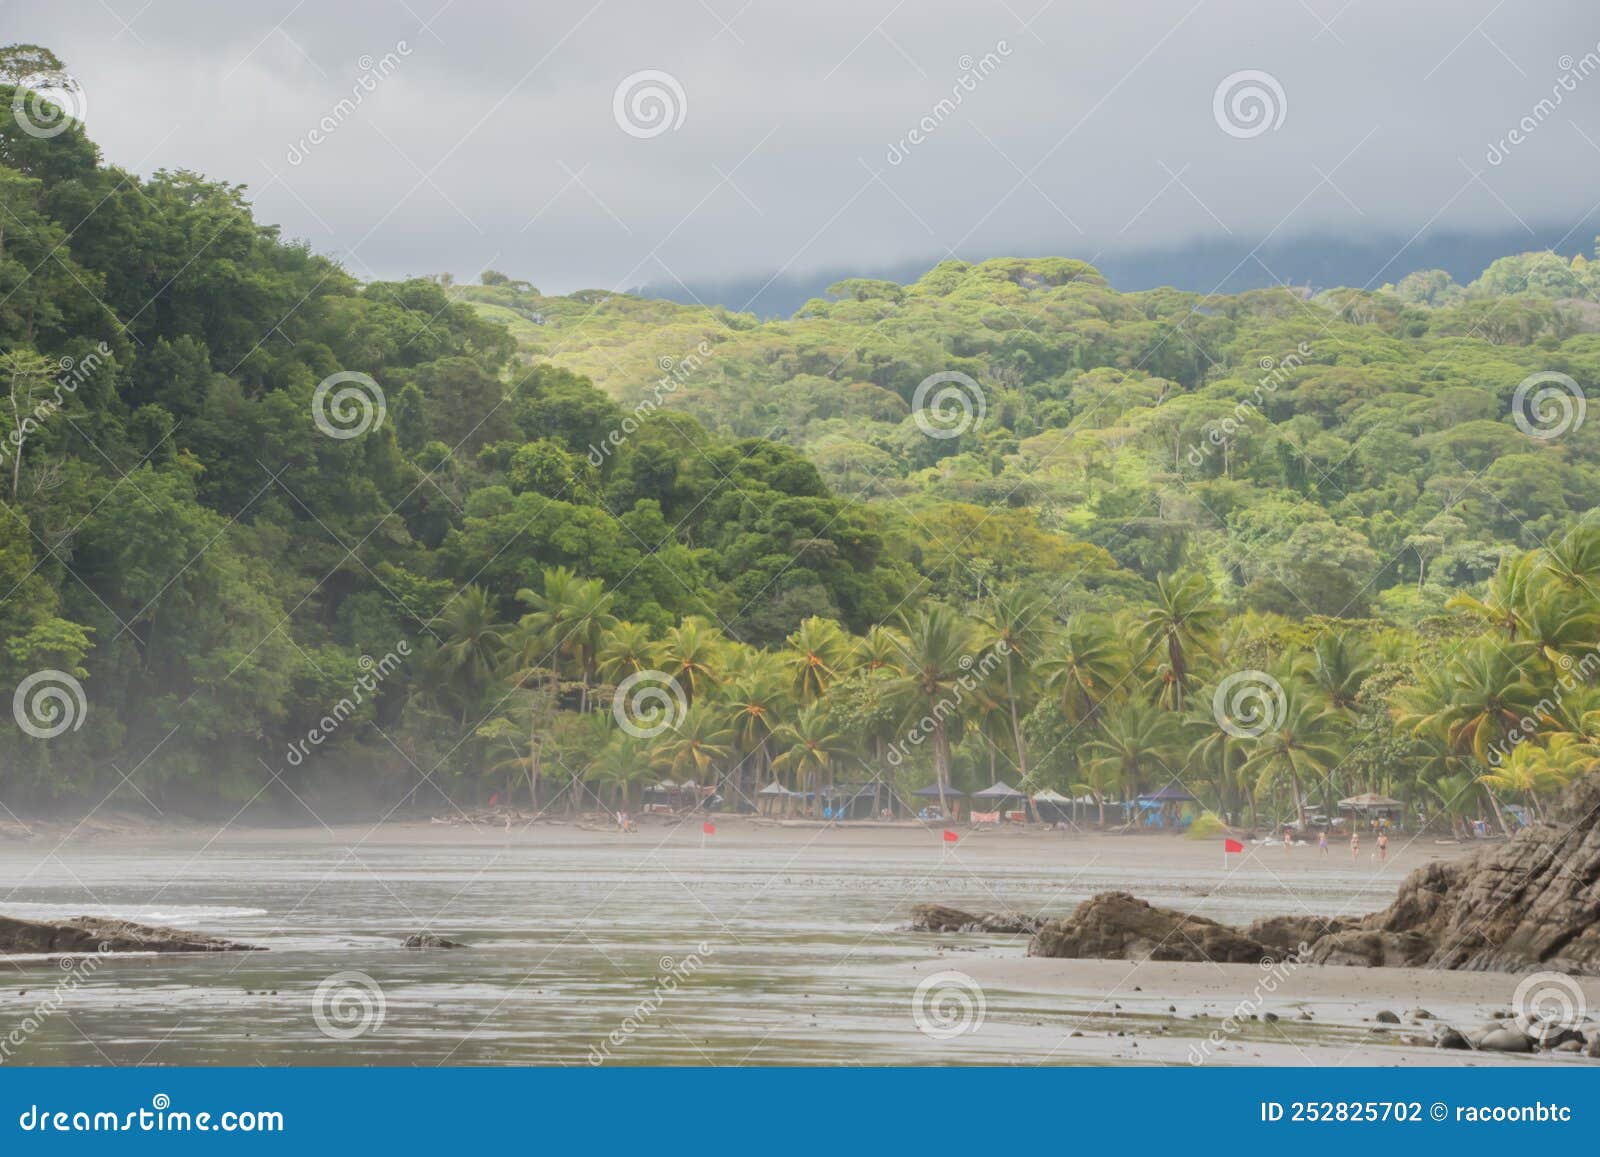 playa ventanas is one of the most beautiful beaches in costa rica